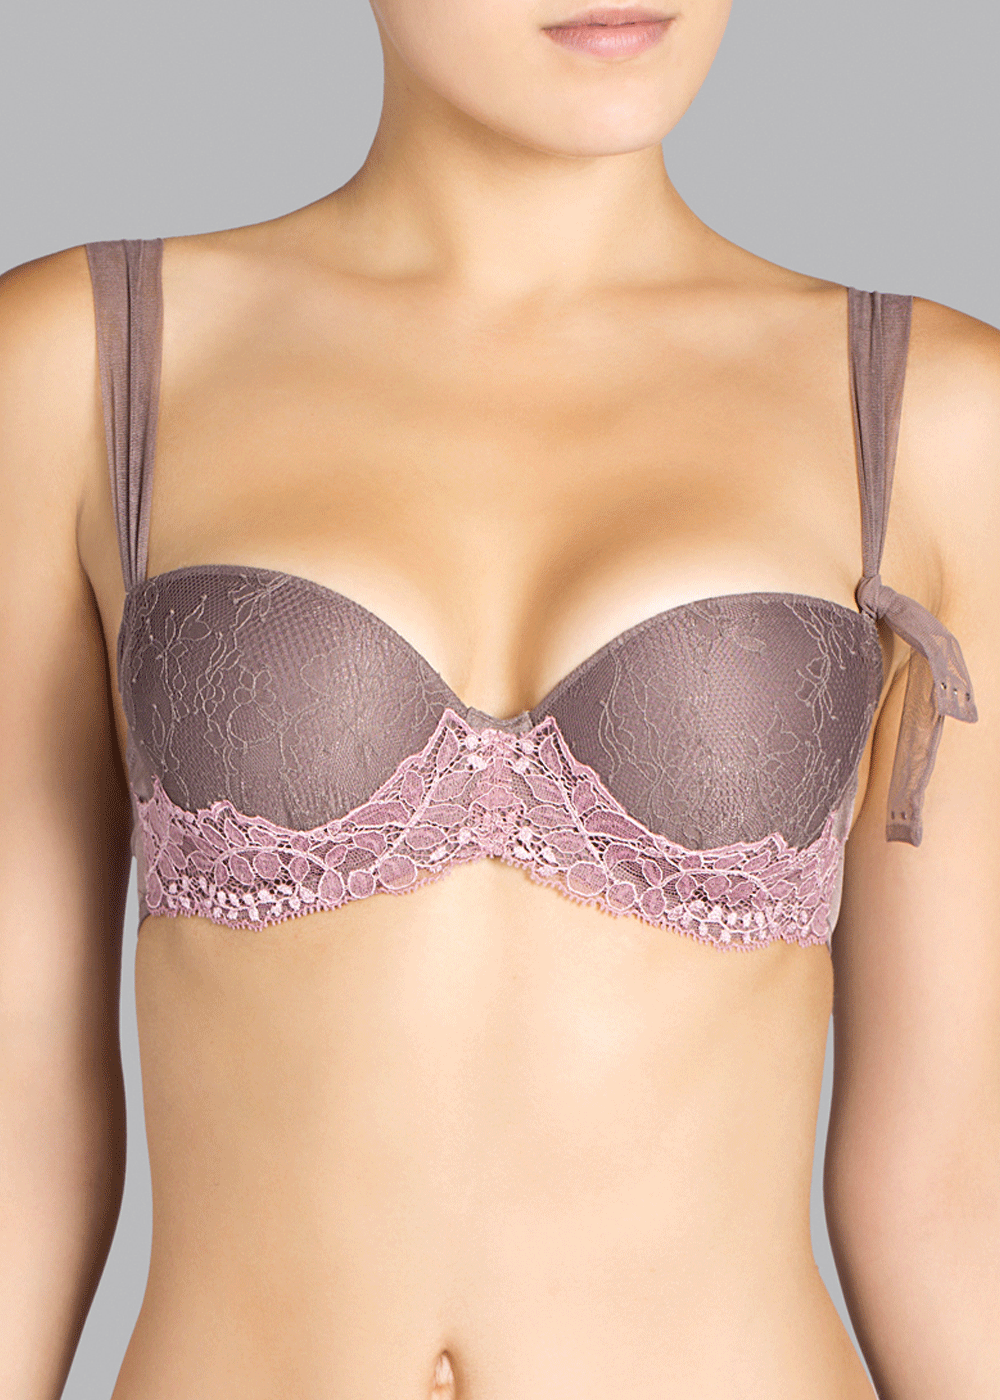 Soutien-gorge Corbeille Rembourr Andres Sarda Taupe